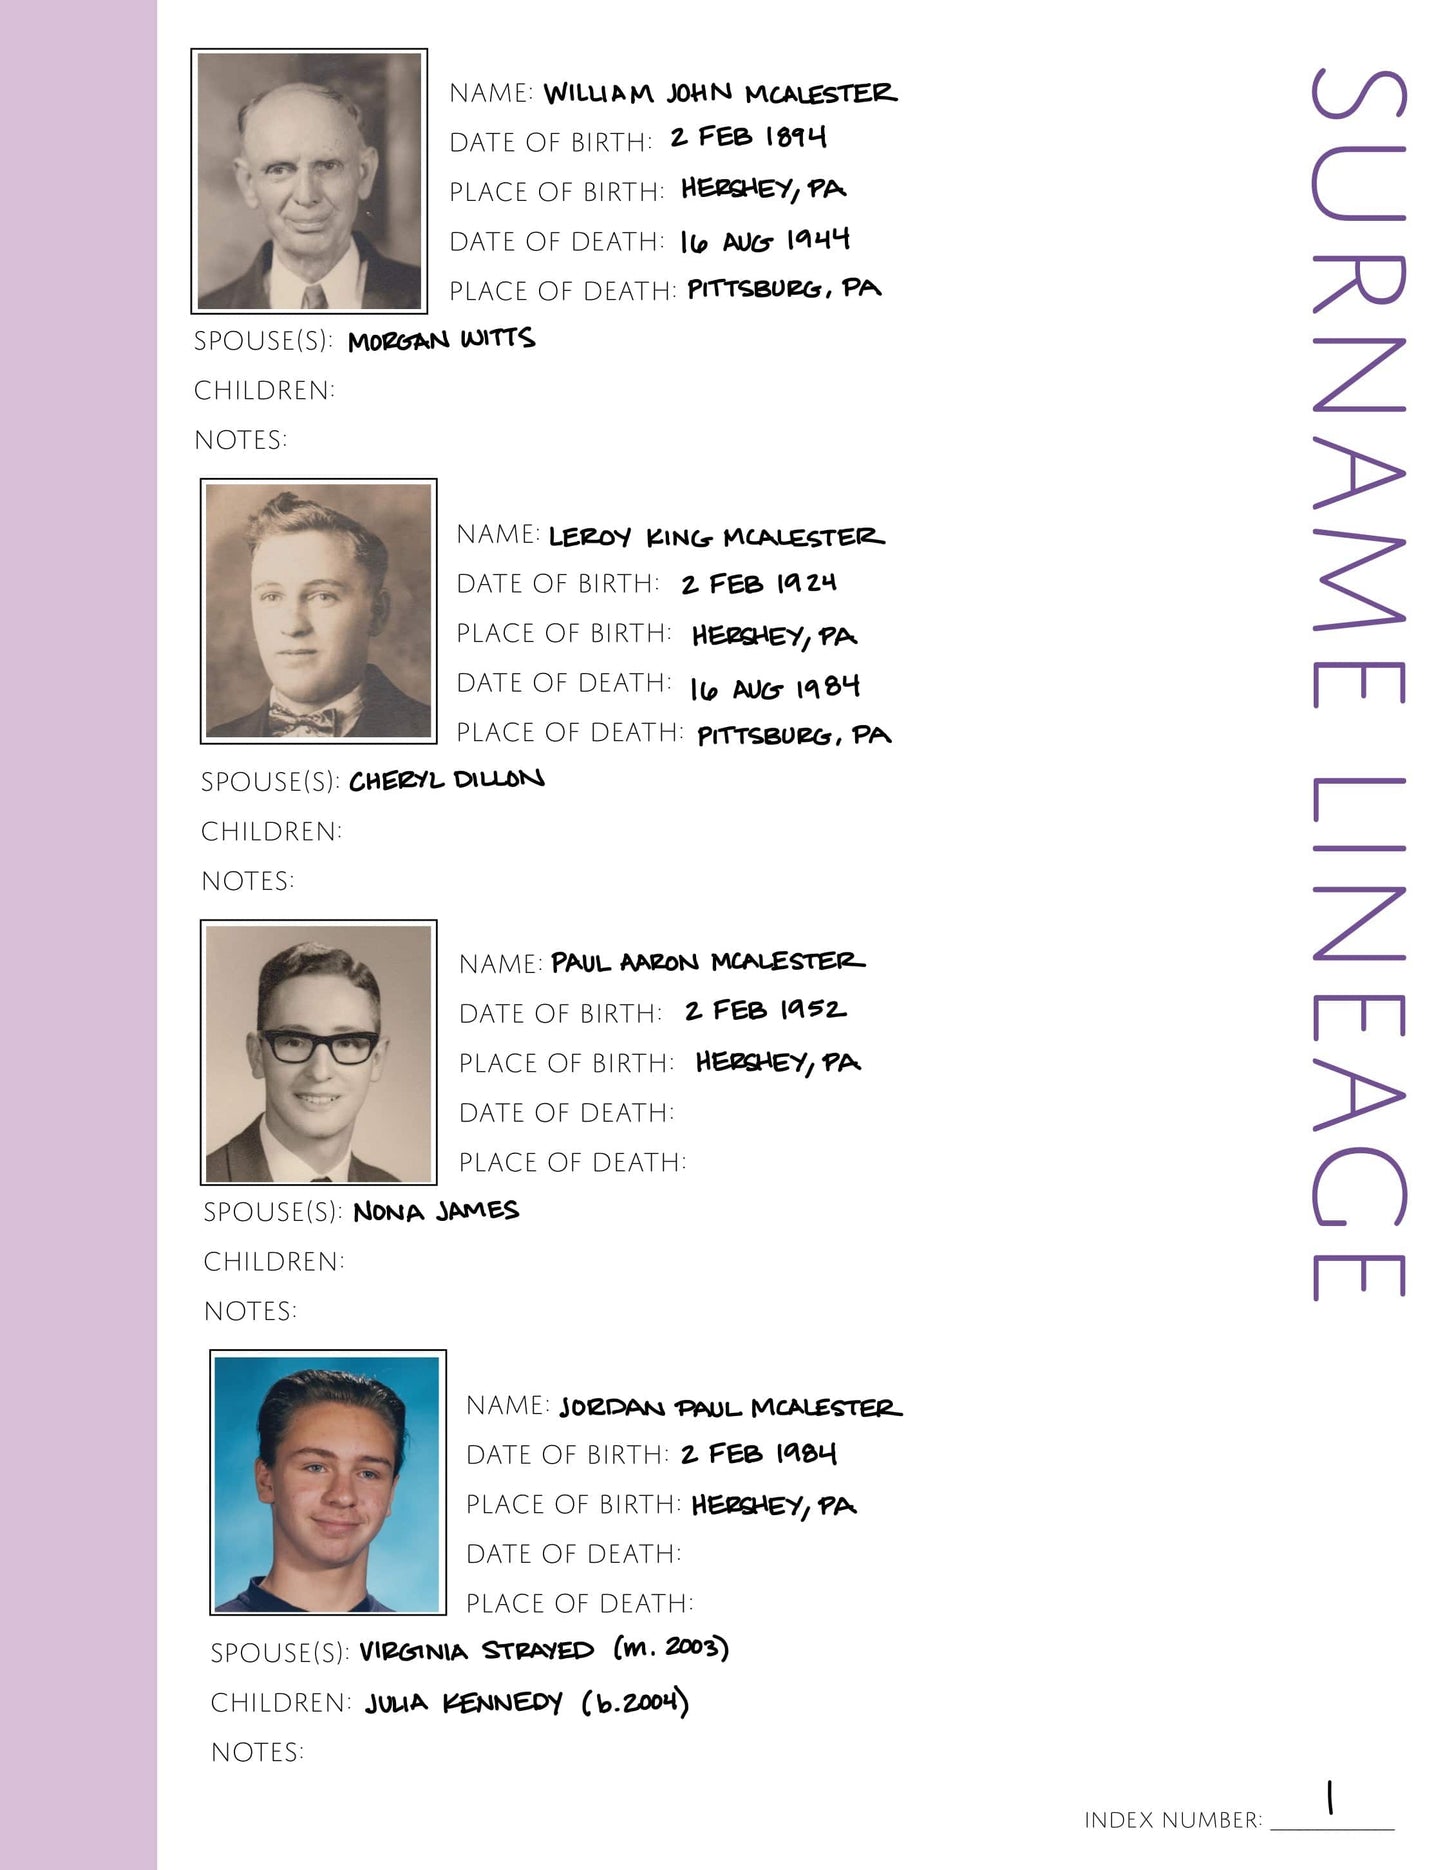 Surname Lineage Photo Page: Printable Genealogy Form (Digital Download)